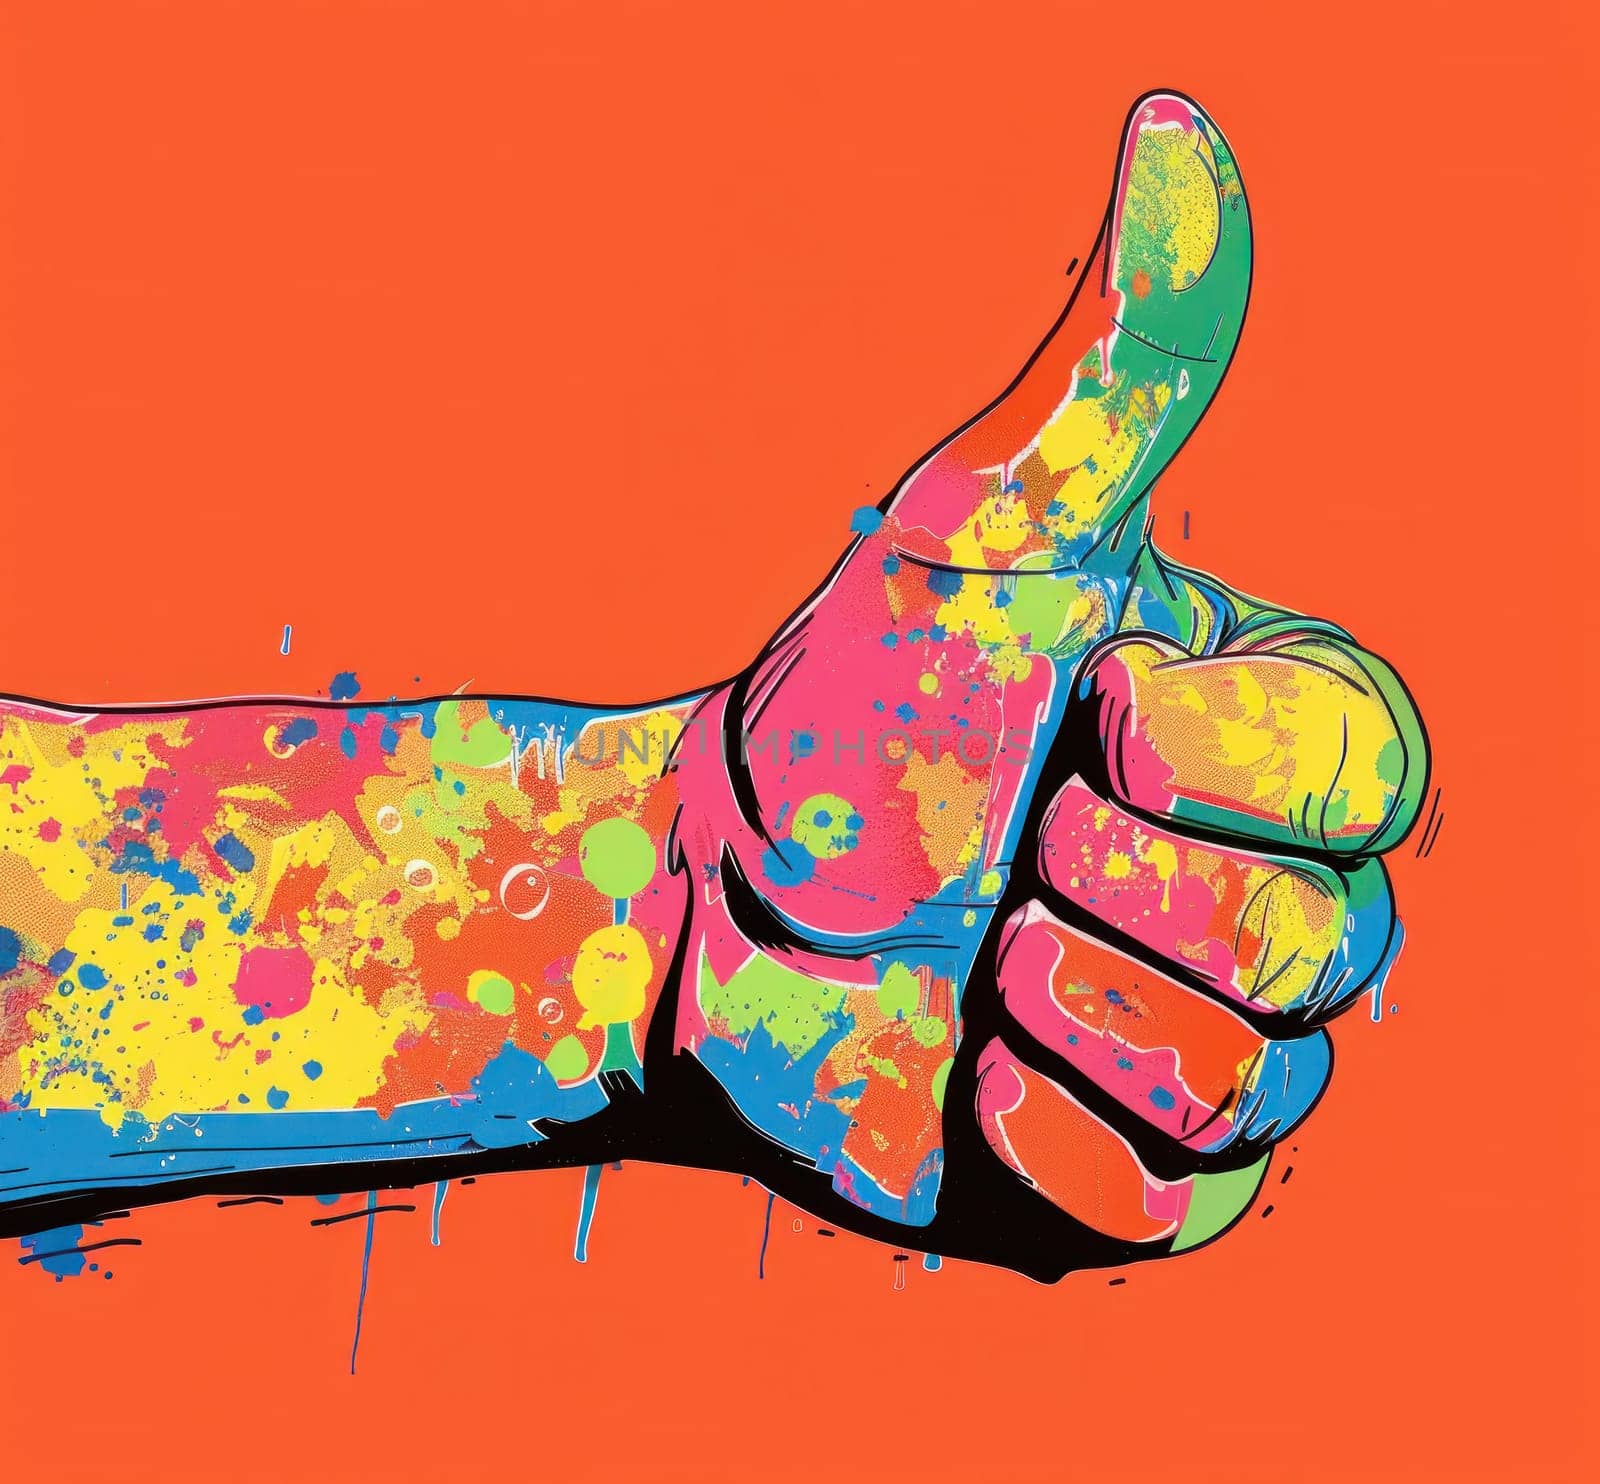 Positive thumbs up gesture concept on vibrant orange background for travel, business, and lifestyle design